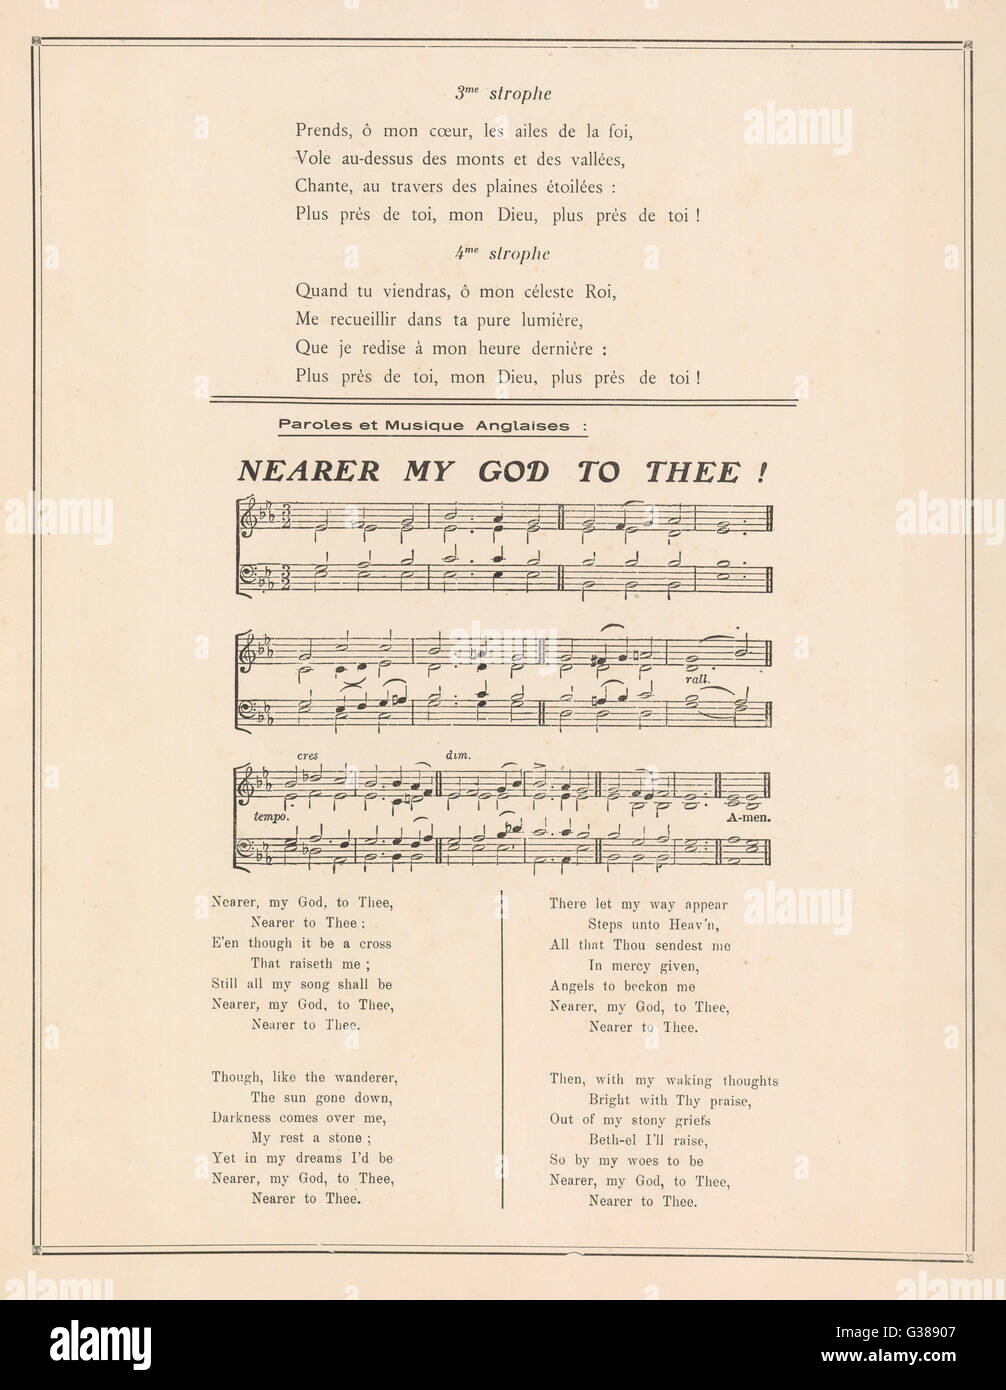 &quot;Nearer My God To Thee&quot; (&quot;Plus Pre De Toi Mon Dieu&quot;) French music sheet of the hymn played by the band on the deck  of the Titanic as the ship  sank.     Date: 1912 Stock Photo